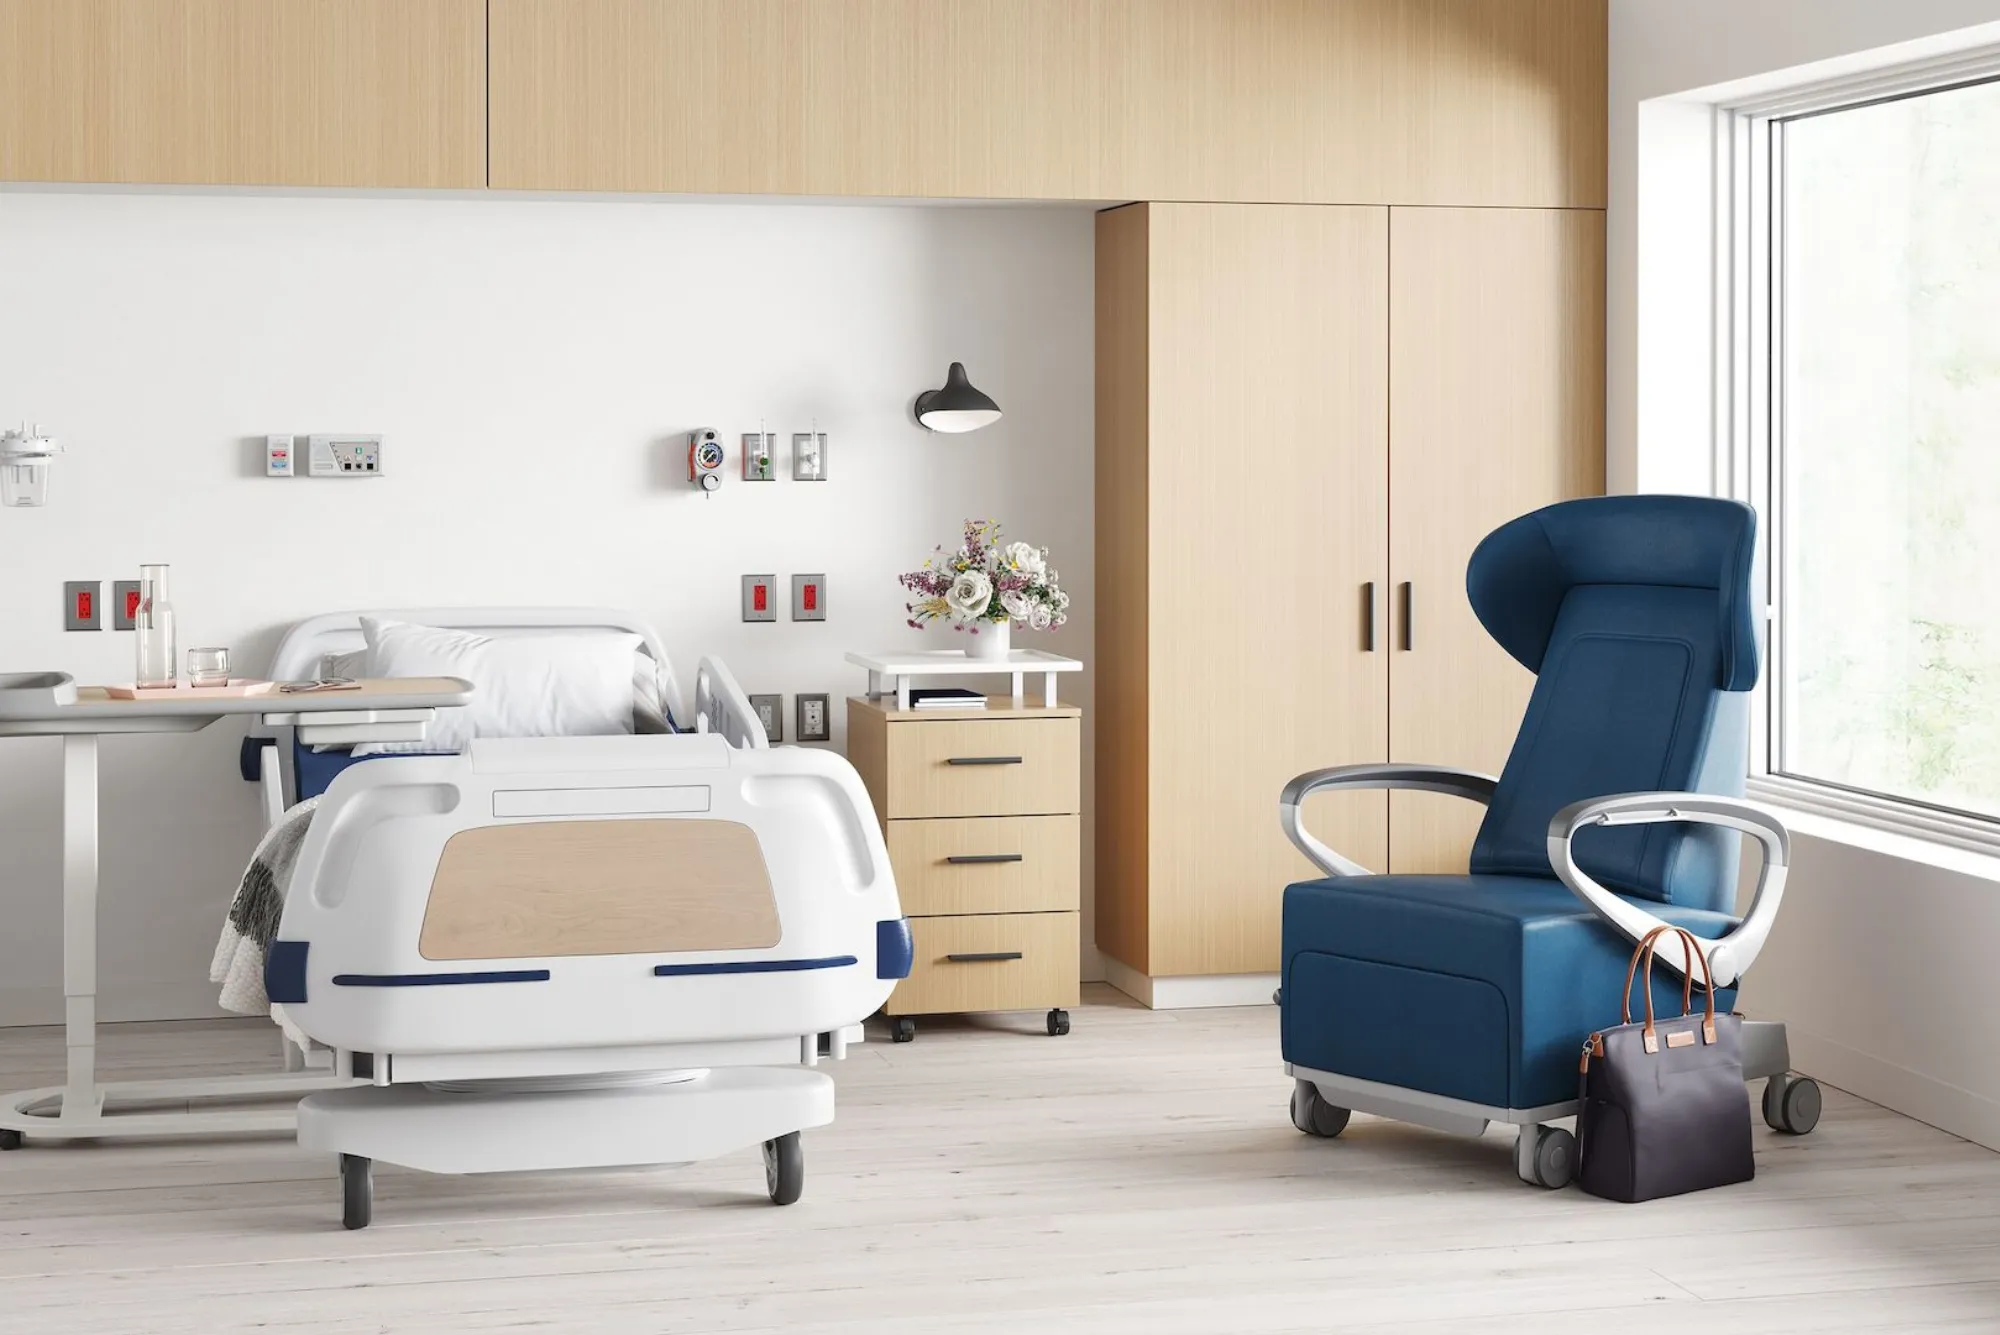 OEKAN Furniture's Hospital Bedside Cabinet A Blend of Durability and Mobility